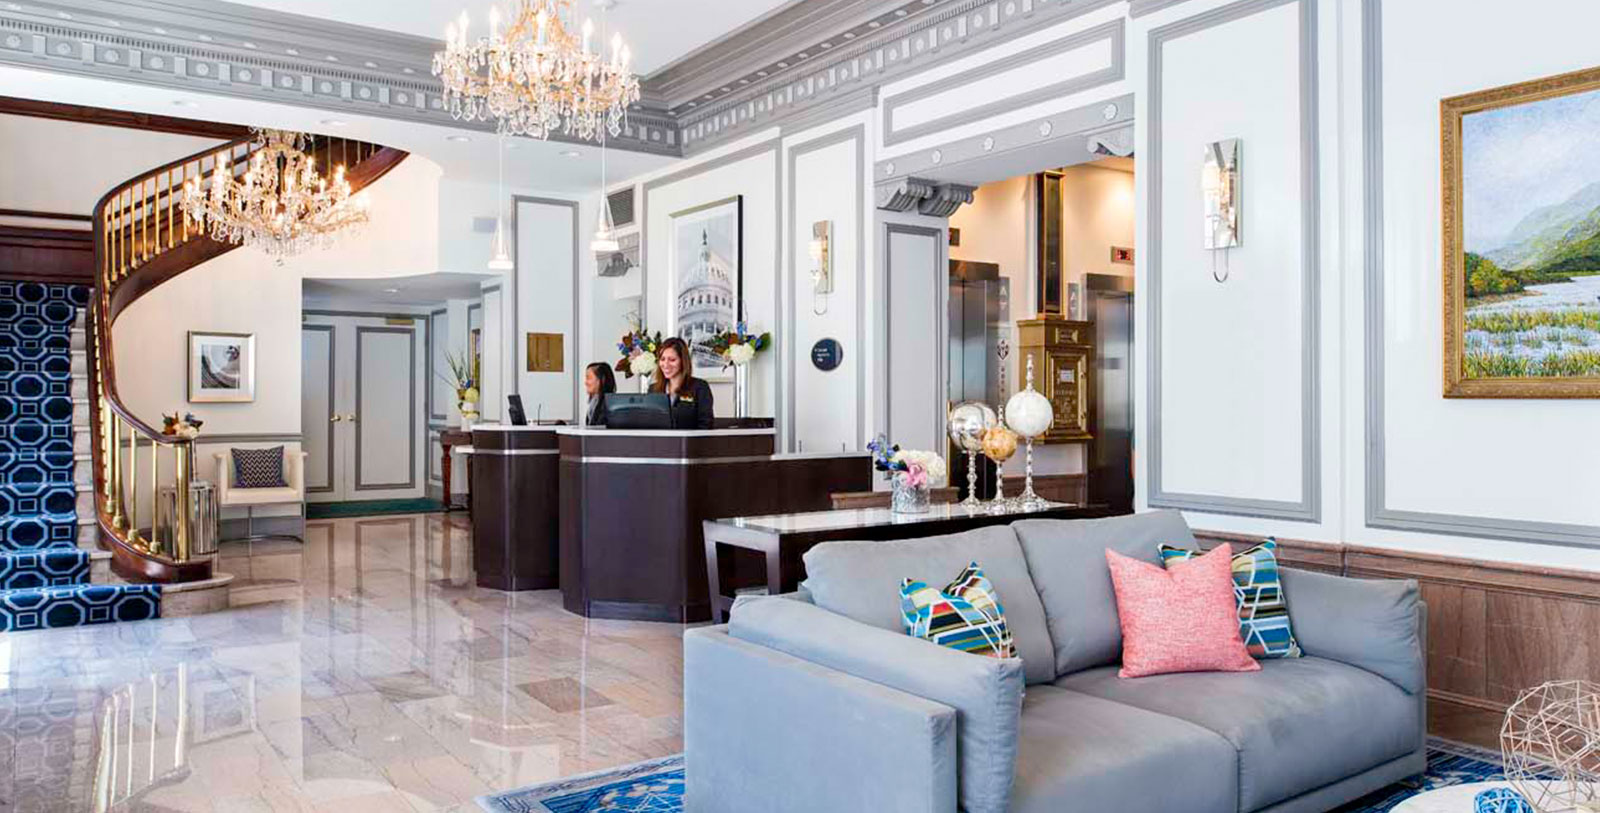 Discover the classic Georgian Revival-style façade of the Phoenix Park Hotel.